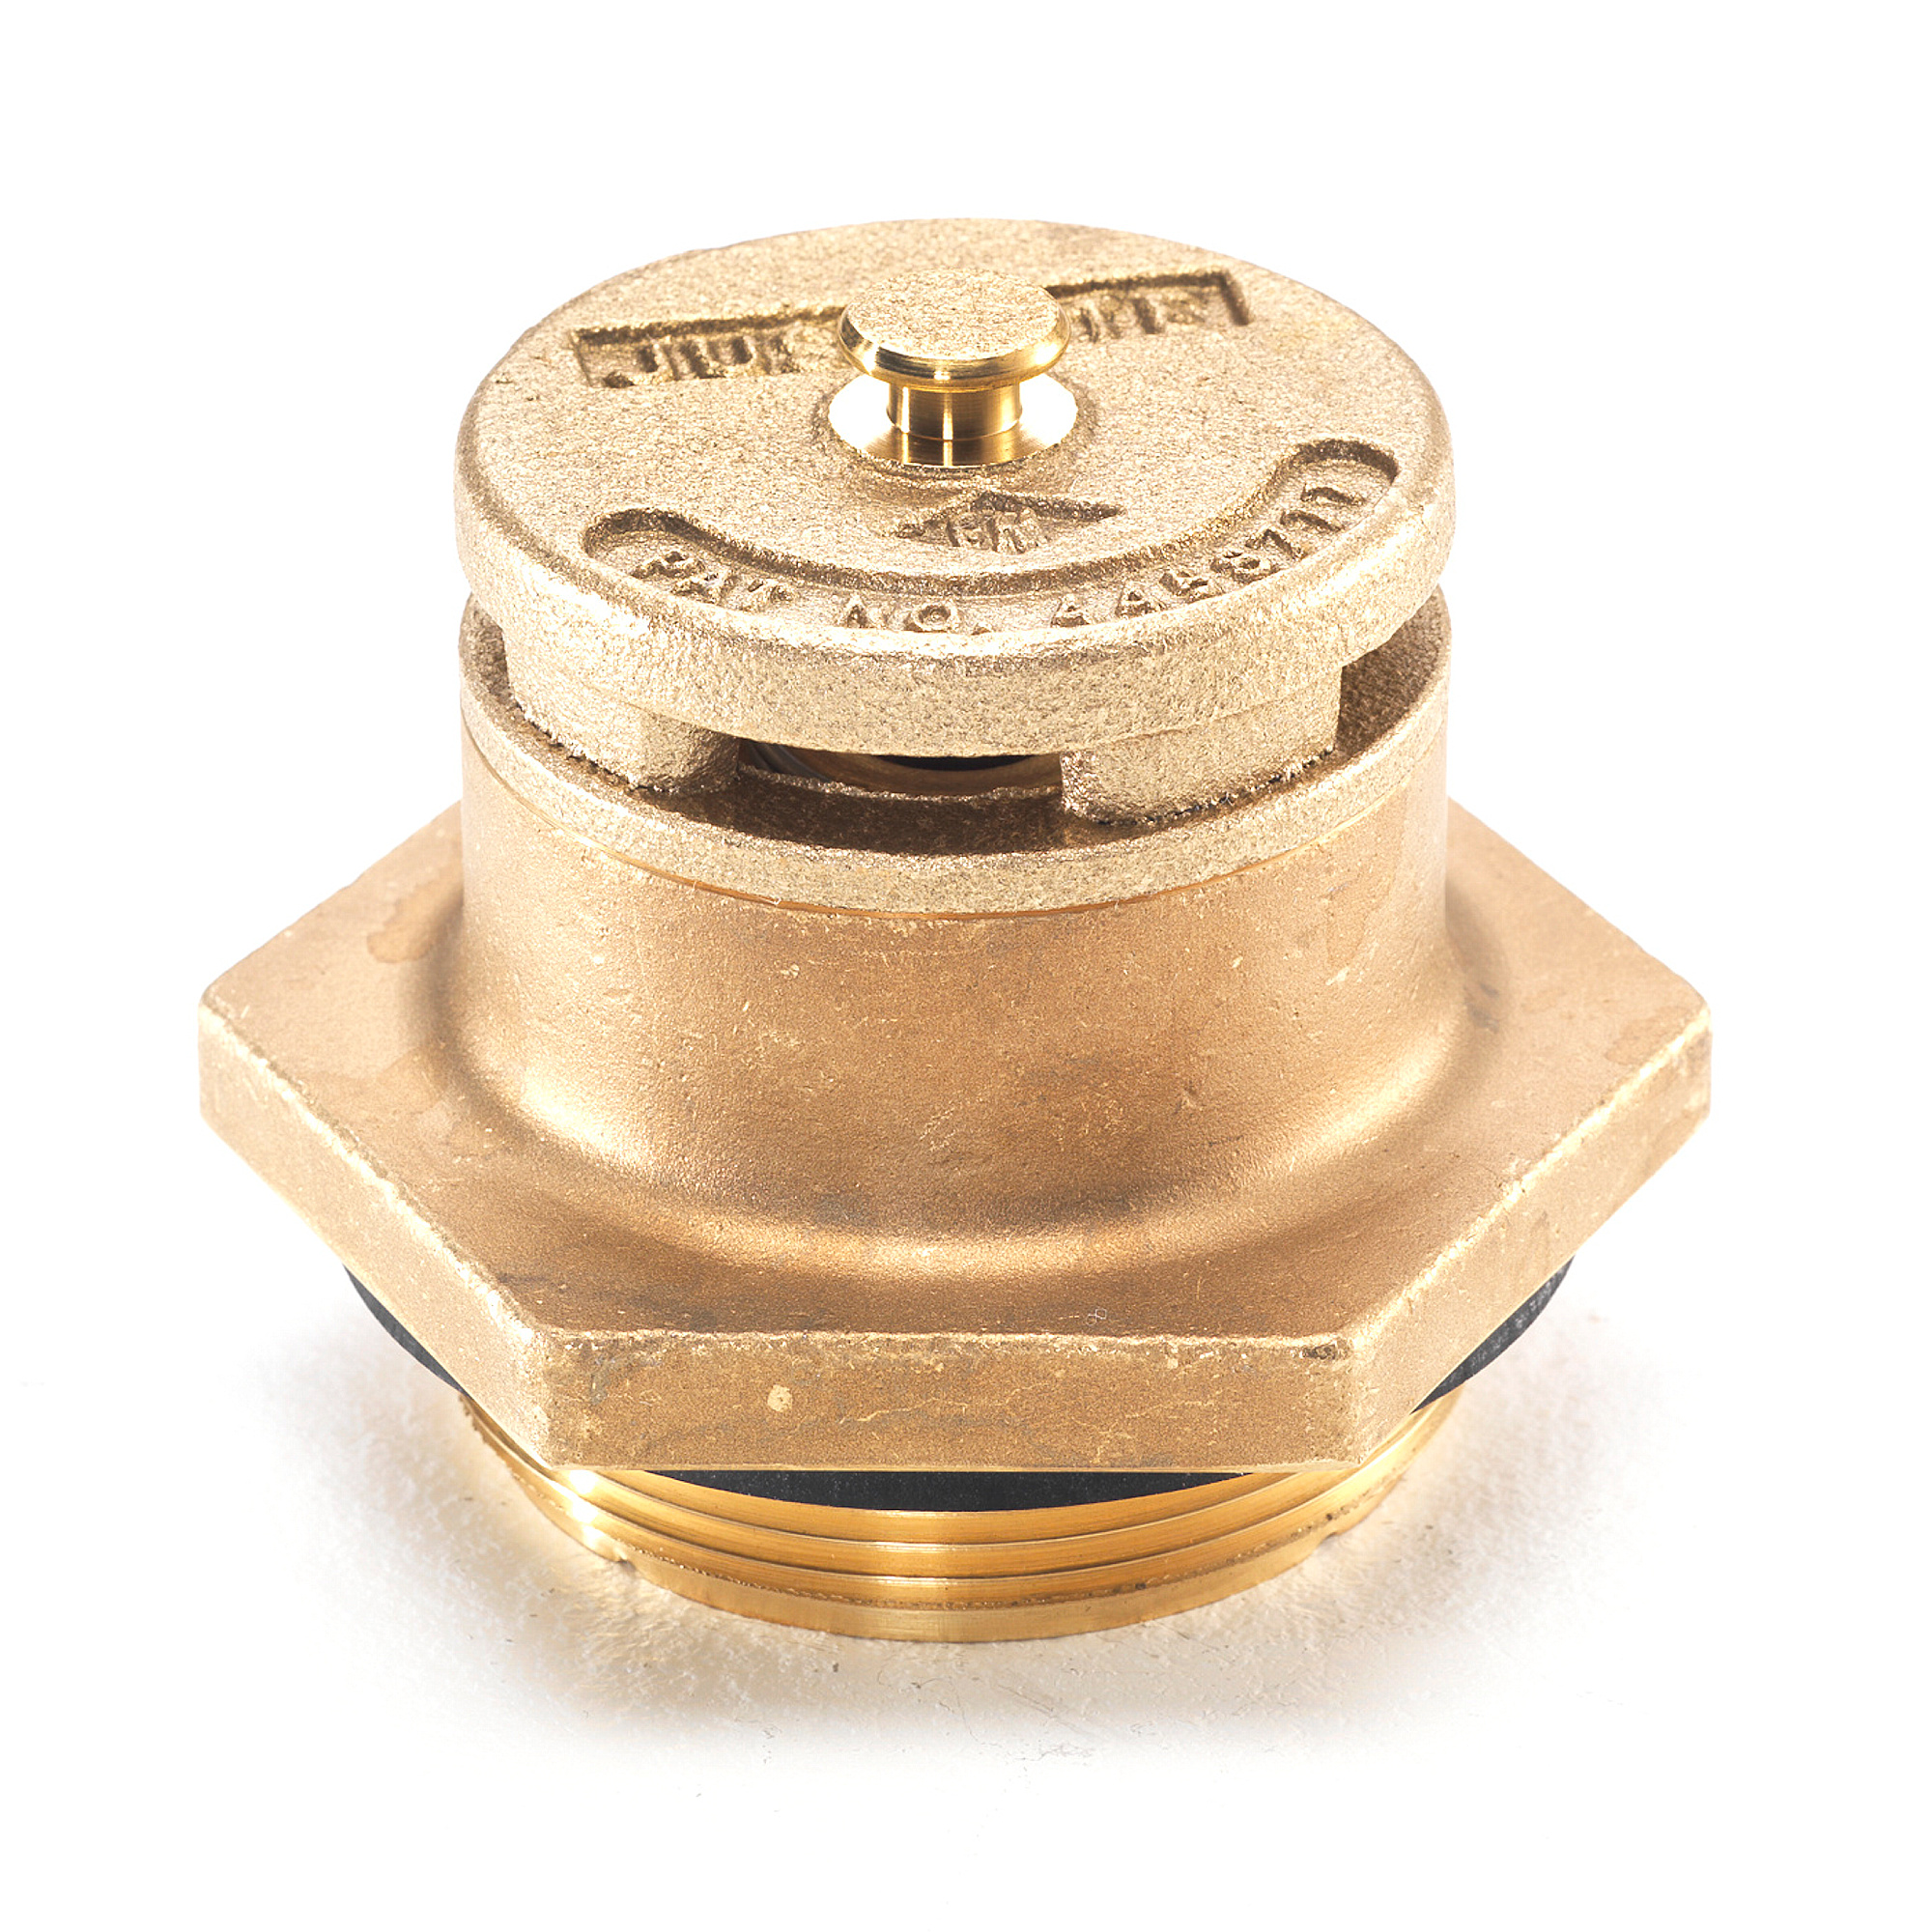 Justrite 08101 Brass Drum Vent For Petroleum Based Products 